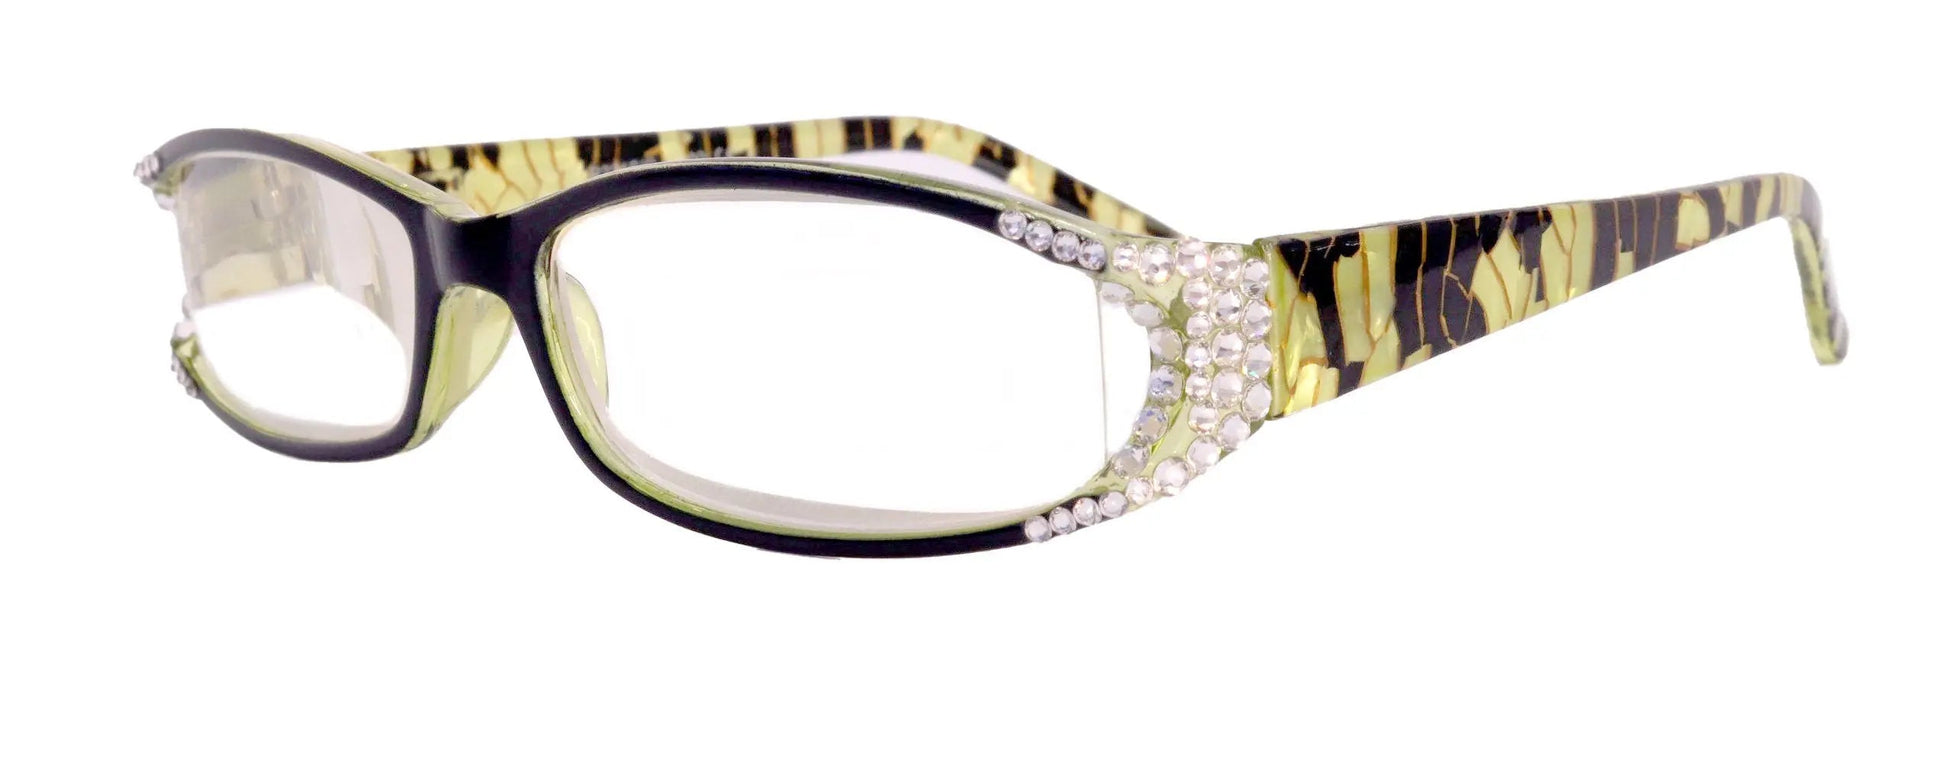 Tuscany, (Bling) Reading Glasses For Women Adorned W (Clear)    (Black, Green) Marble Rectangular, NY Fifth Avenue 